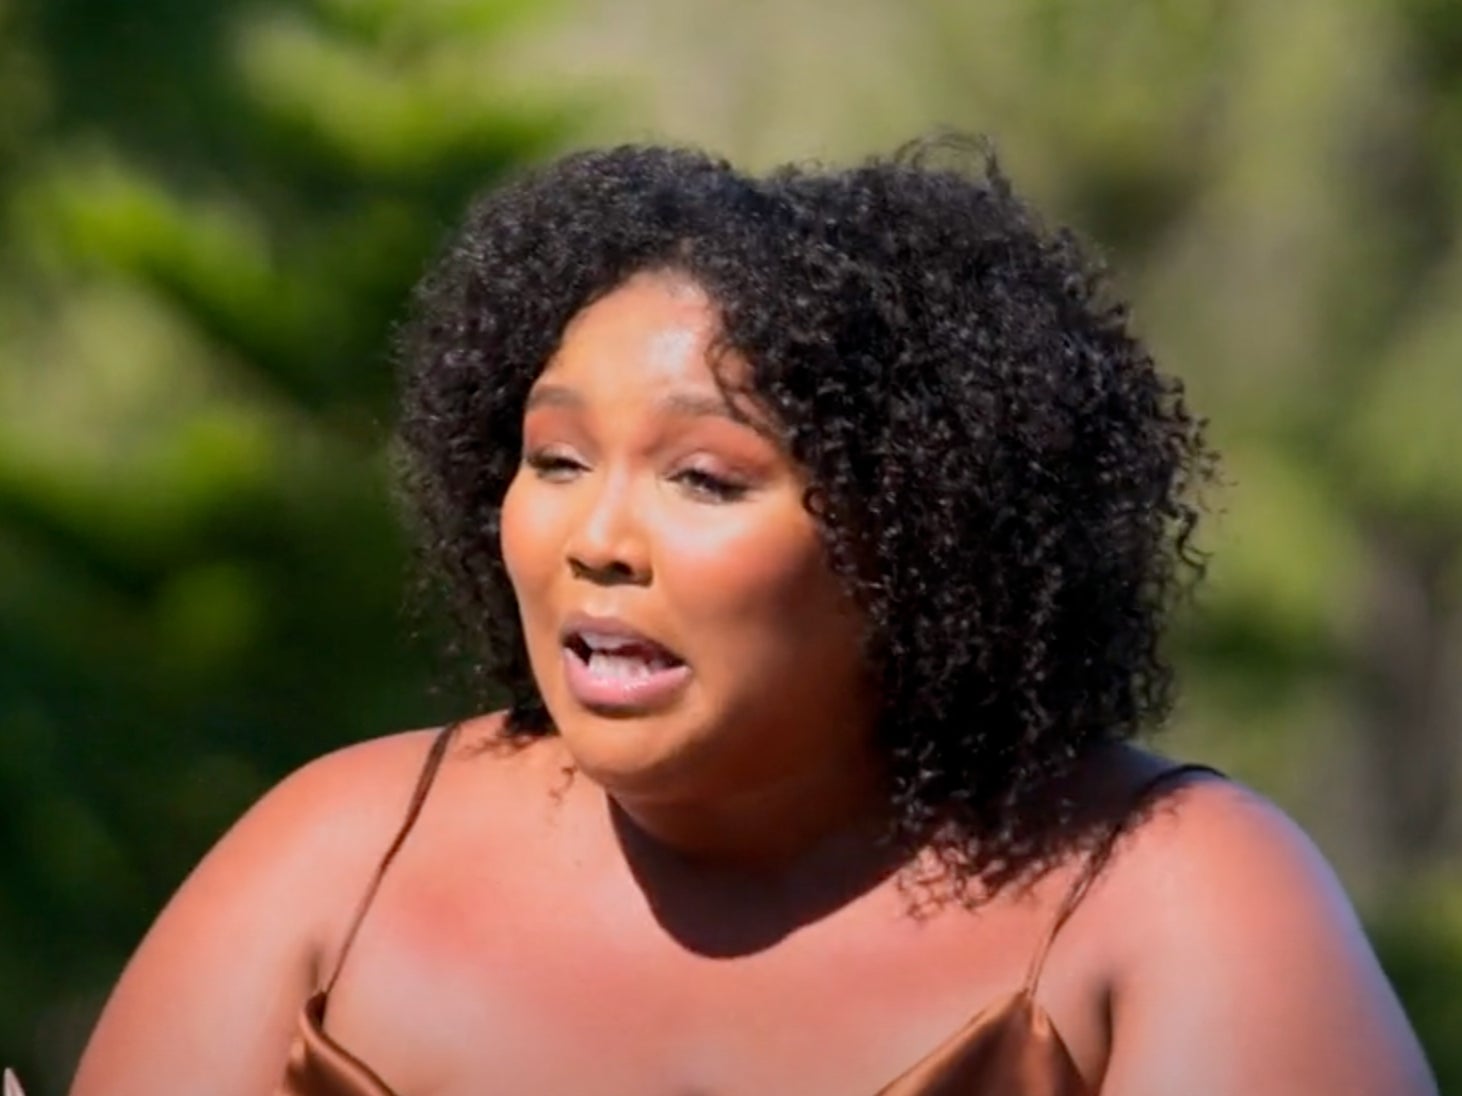 Lizzo tasked ‘Watch Out for the Big Grrrls’ competitors with posing nude